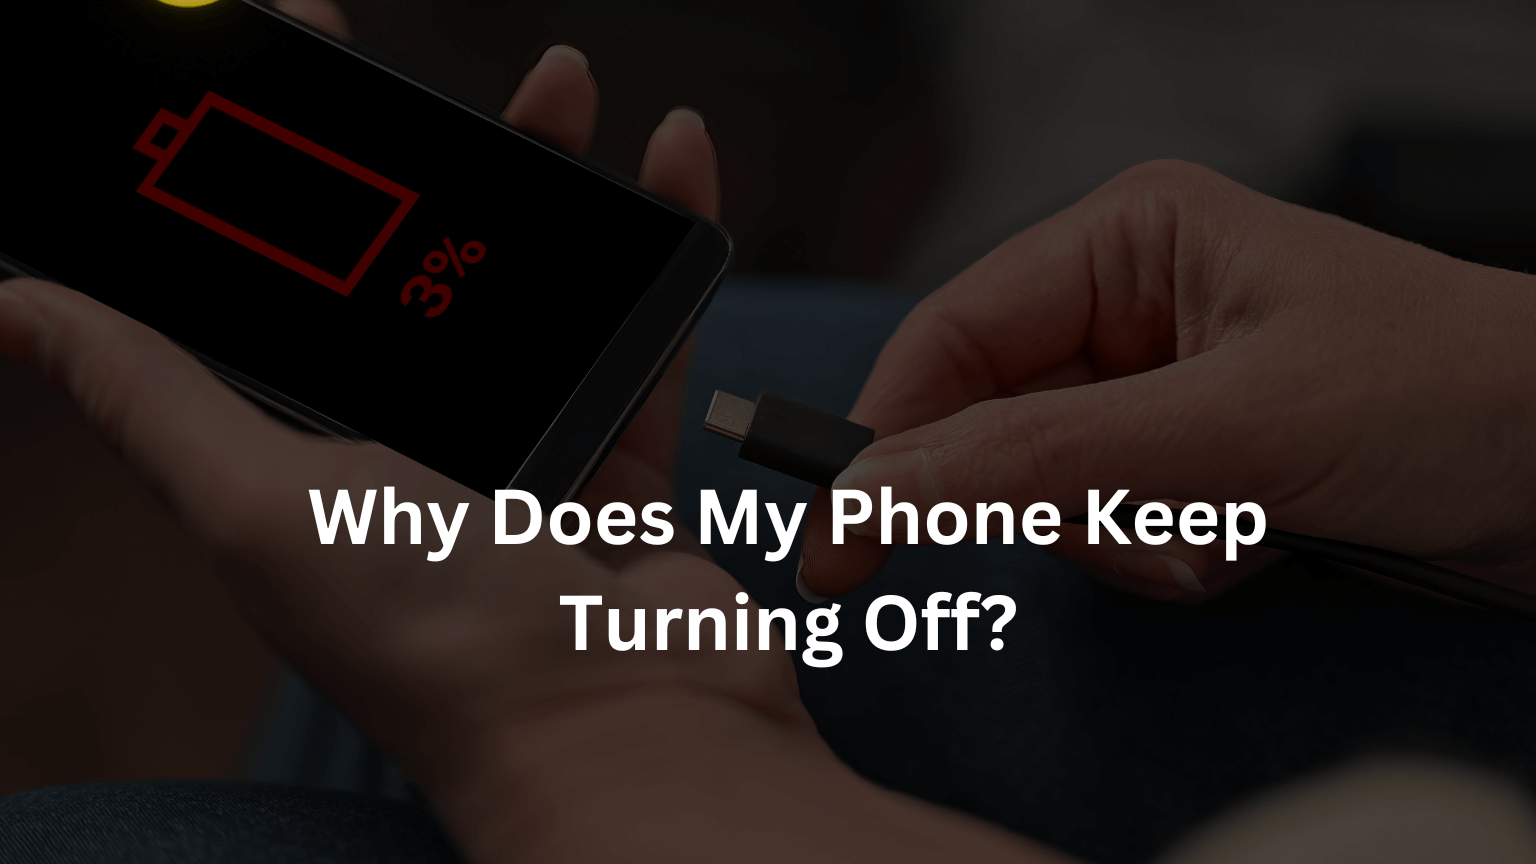 Why Does My Phone Keep Turning Off?